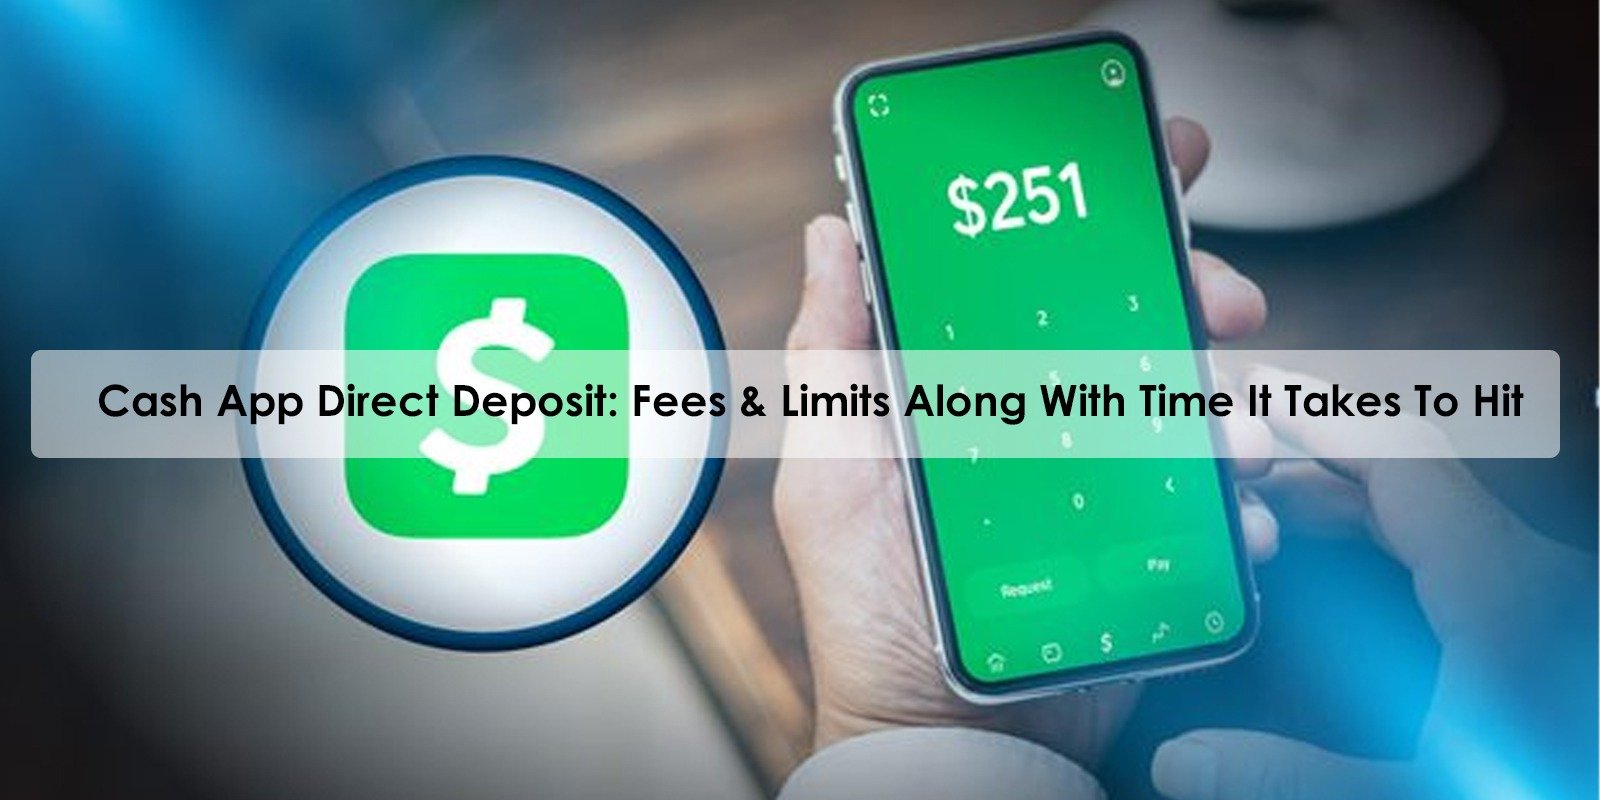 Cash App Direct Deposit: Fees & Limits Along With Time It Takes